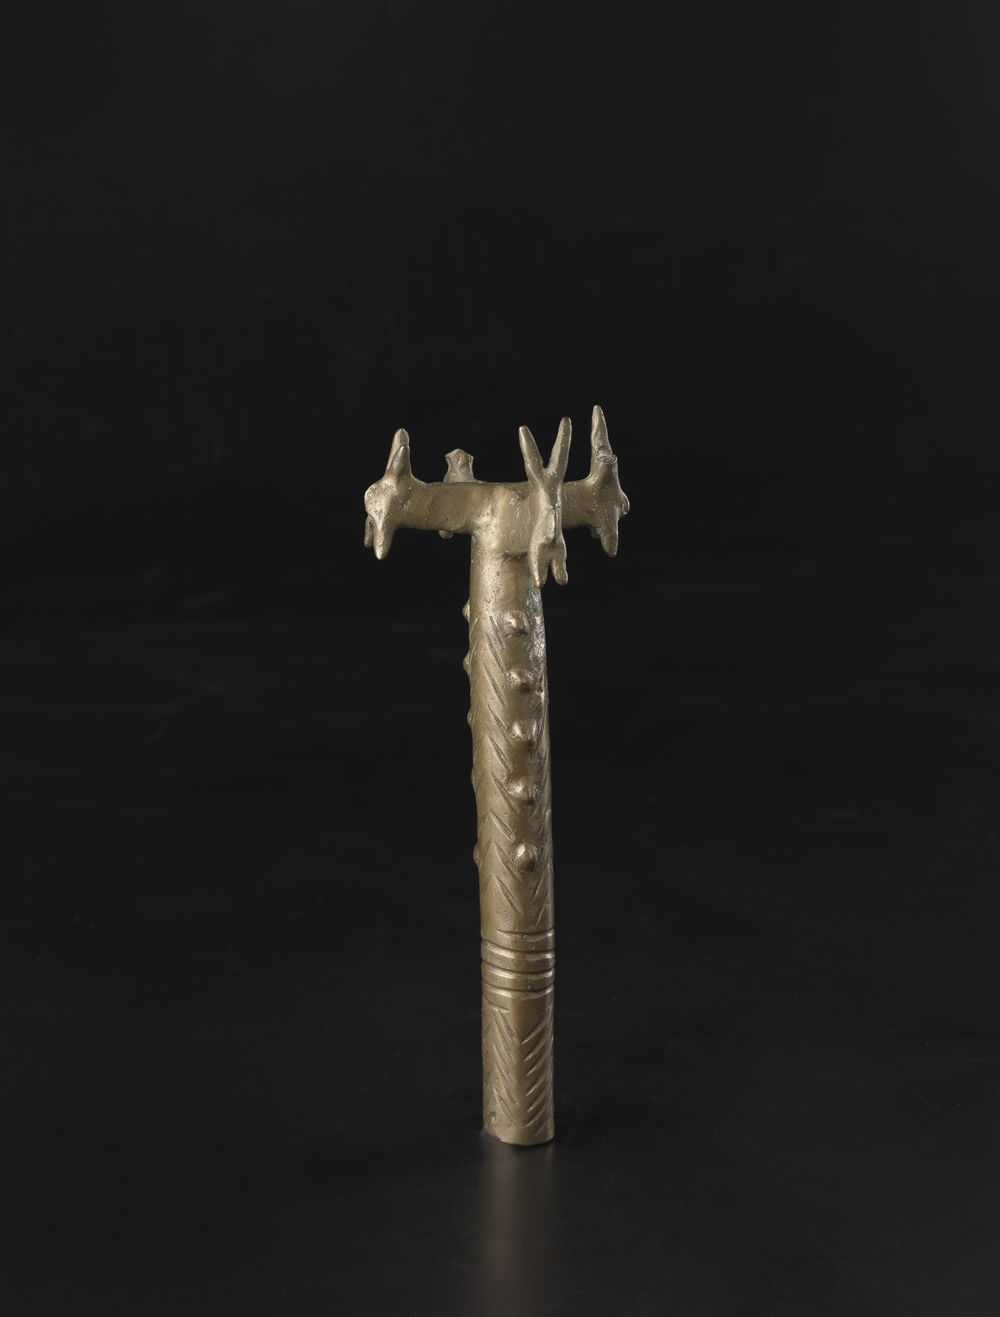 Copper scepter with Grooved Shaft and Four Horned Animal-Head Finials.